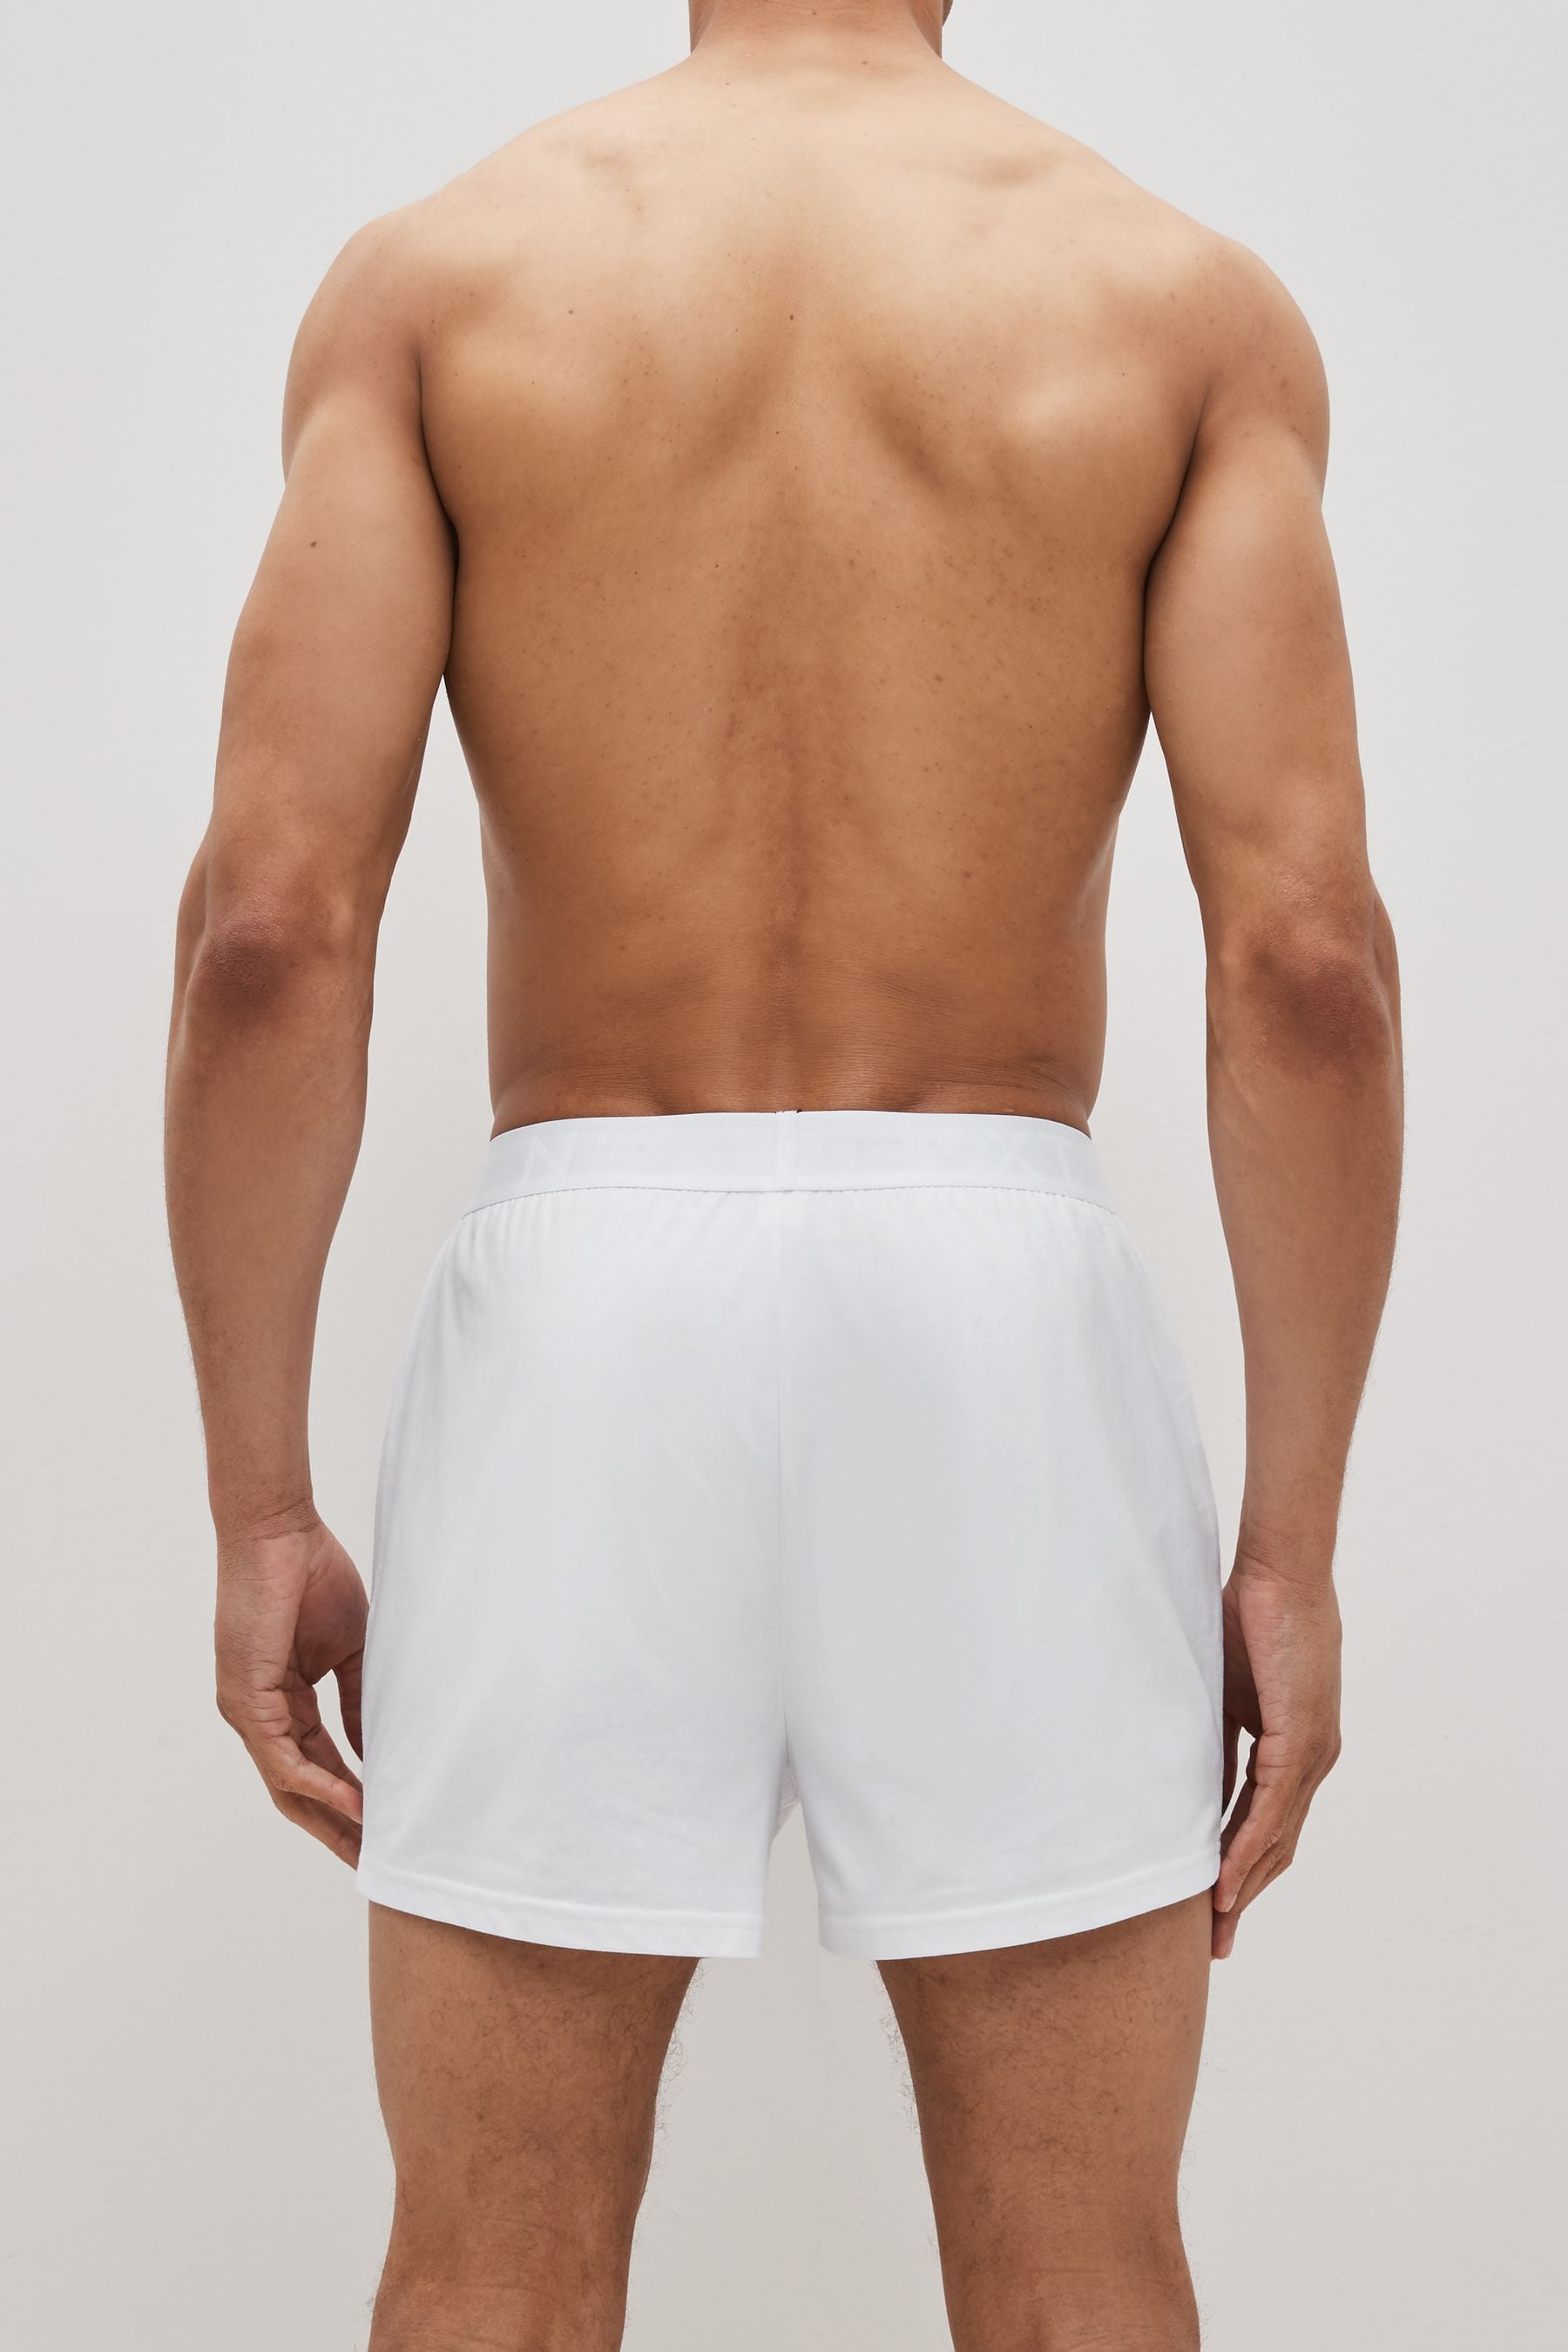 Buy White 4 pack Boxers from the Next UK online shop